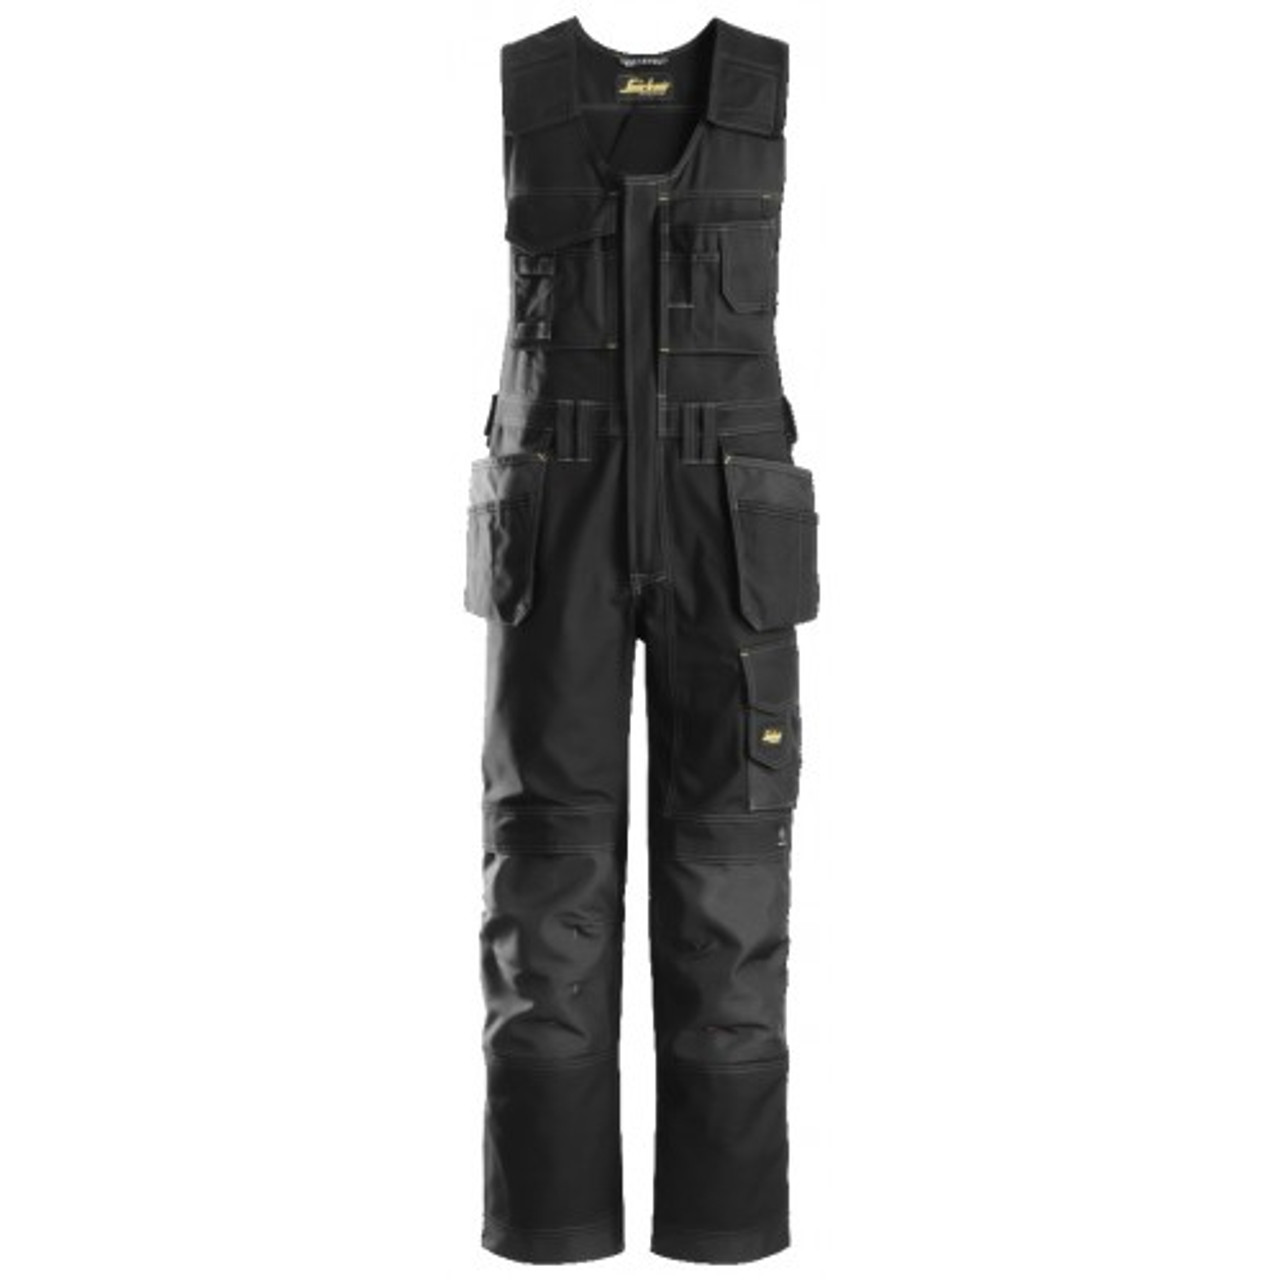 Buy online, SNICKERS Overalls with Holster Pockets for the Woodworking industry.